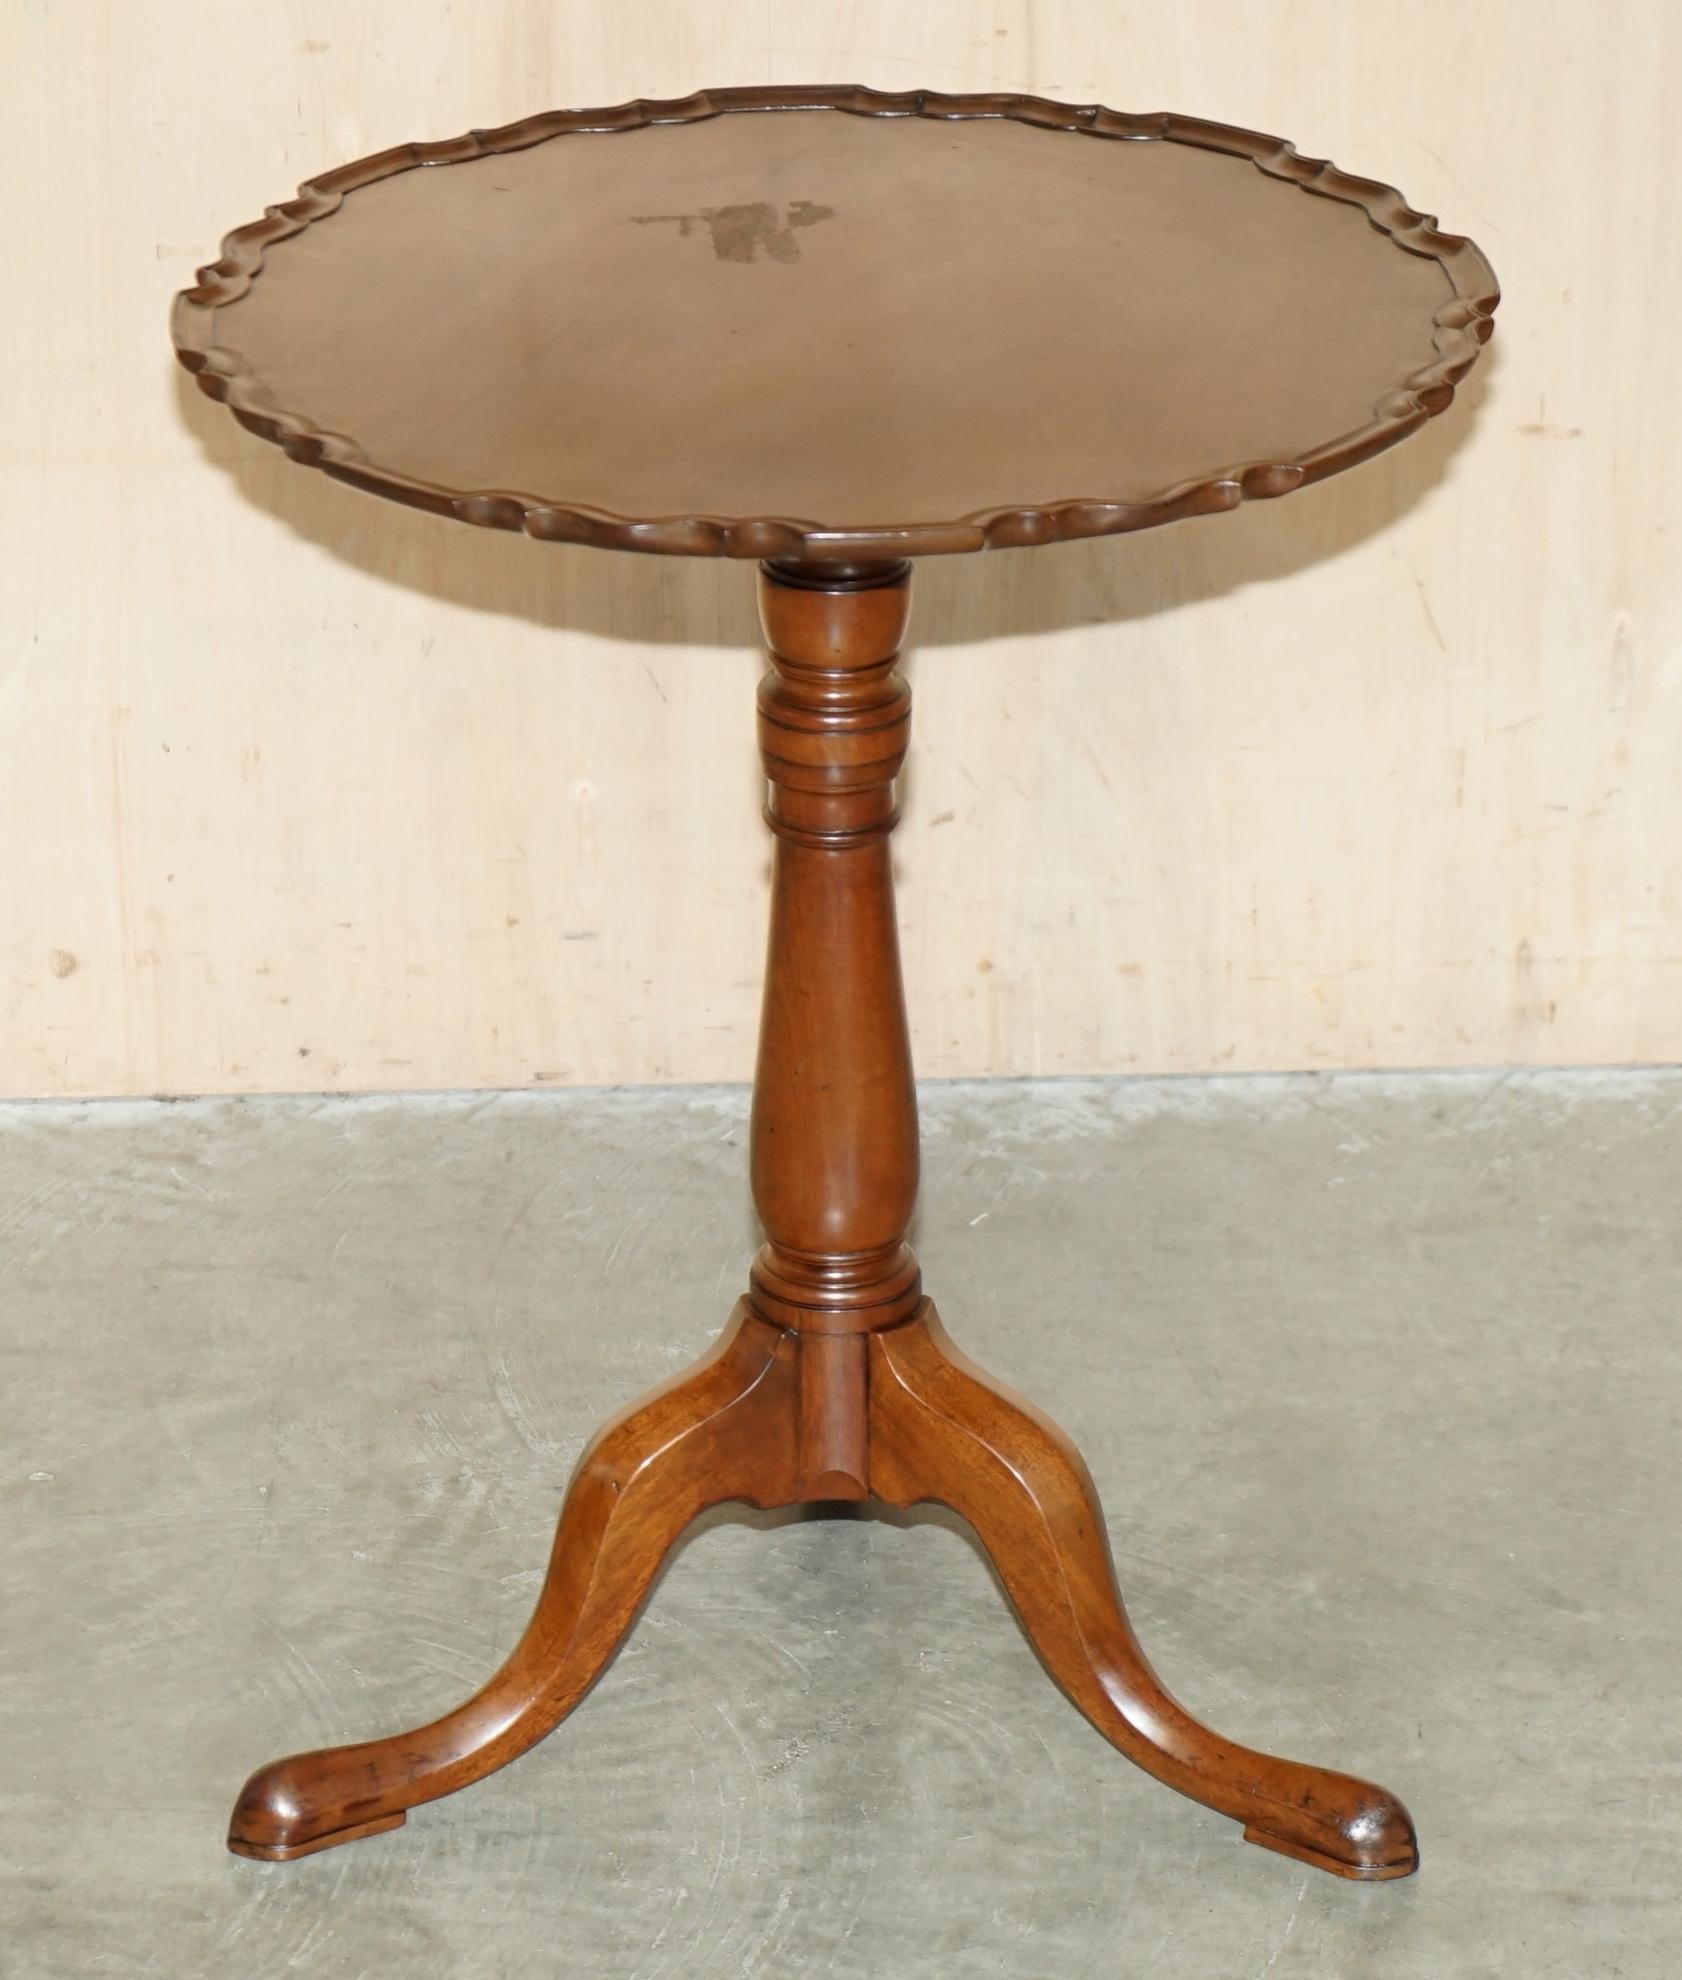 Royal House Antiques

Royal House Antiques is delighted to offer for sale this lovely circa 1910 flamed mahogany Pie Crust edge tripod lamp table

Please note the delivery fee listed is just a guide, it covers within the M25 only for the UK and